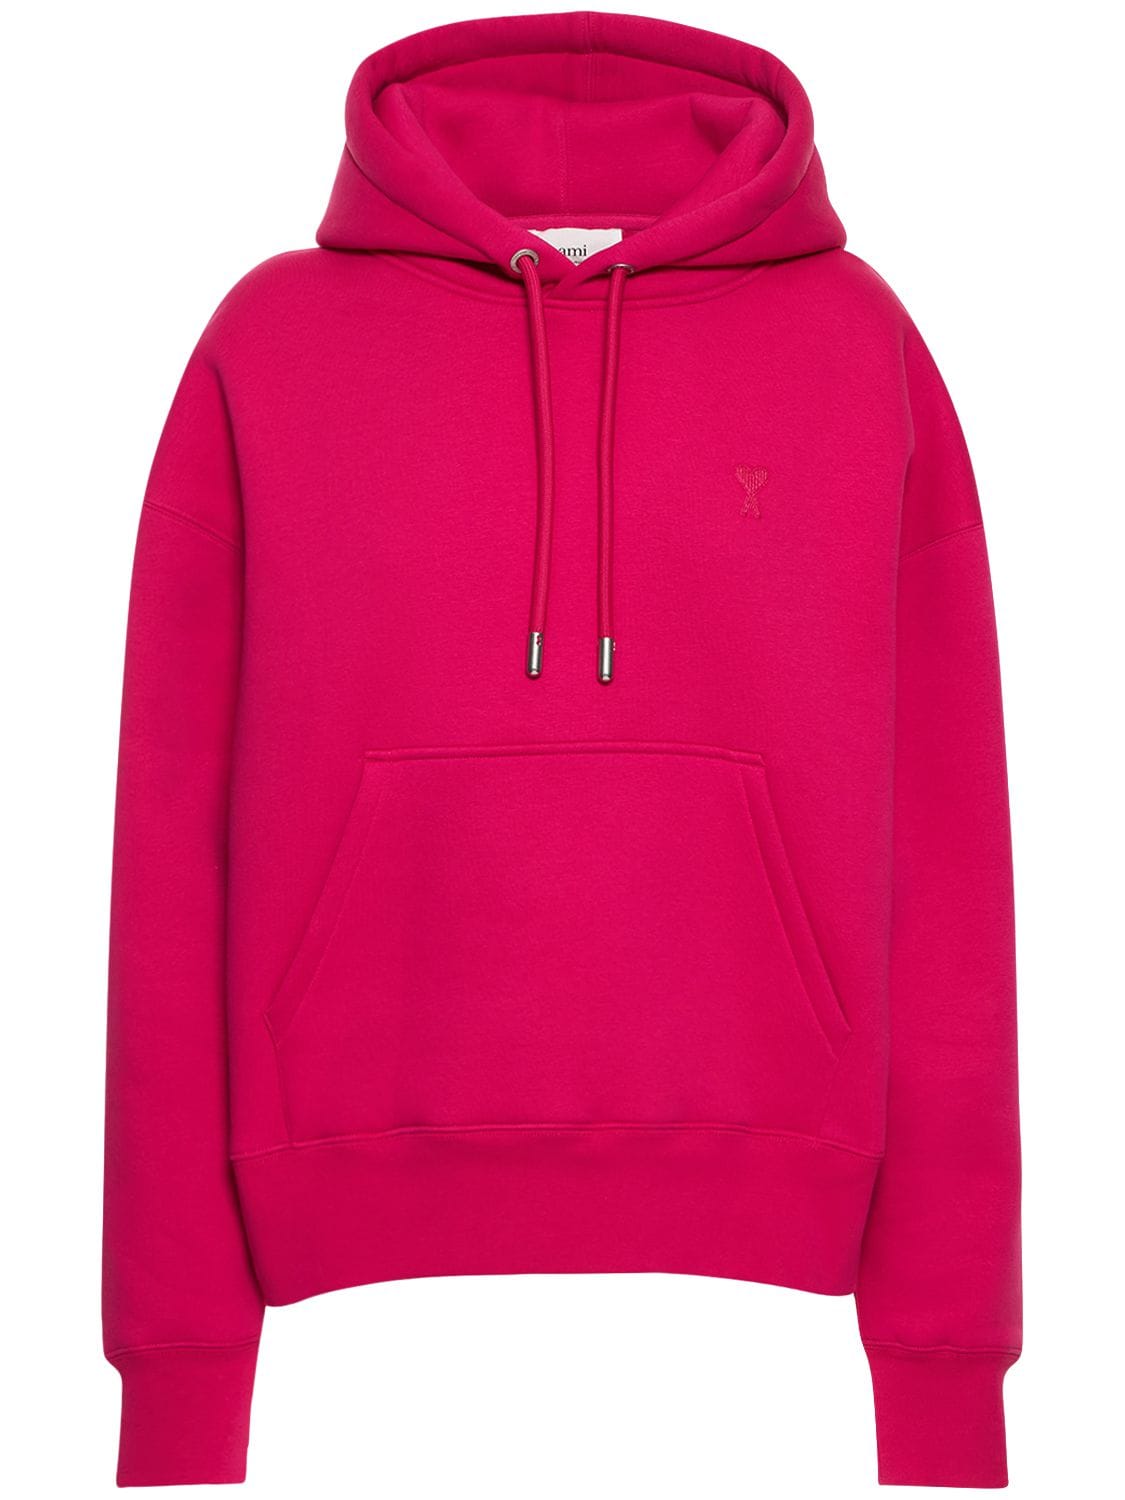 AMI PARIS Organic Cotton & Recycled Poly Hoodie